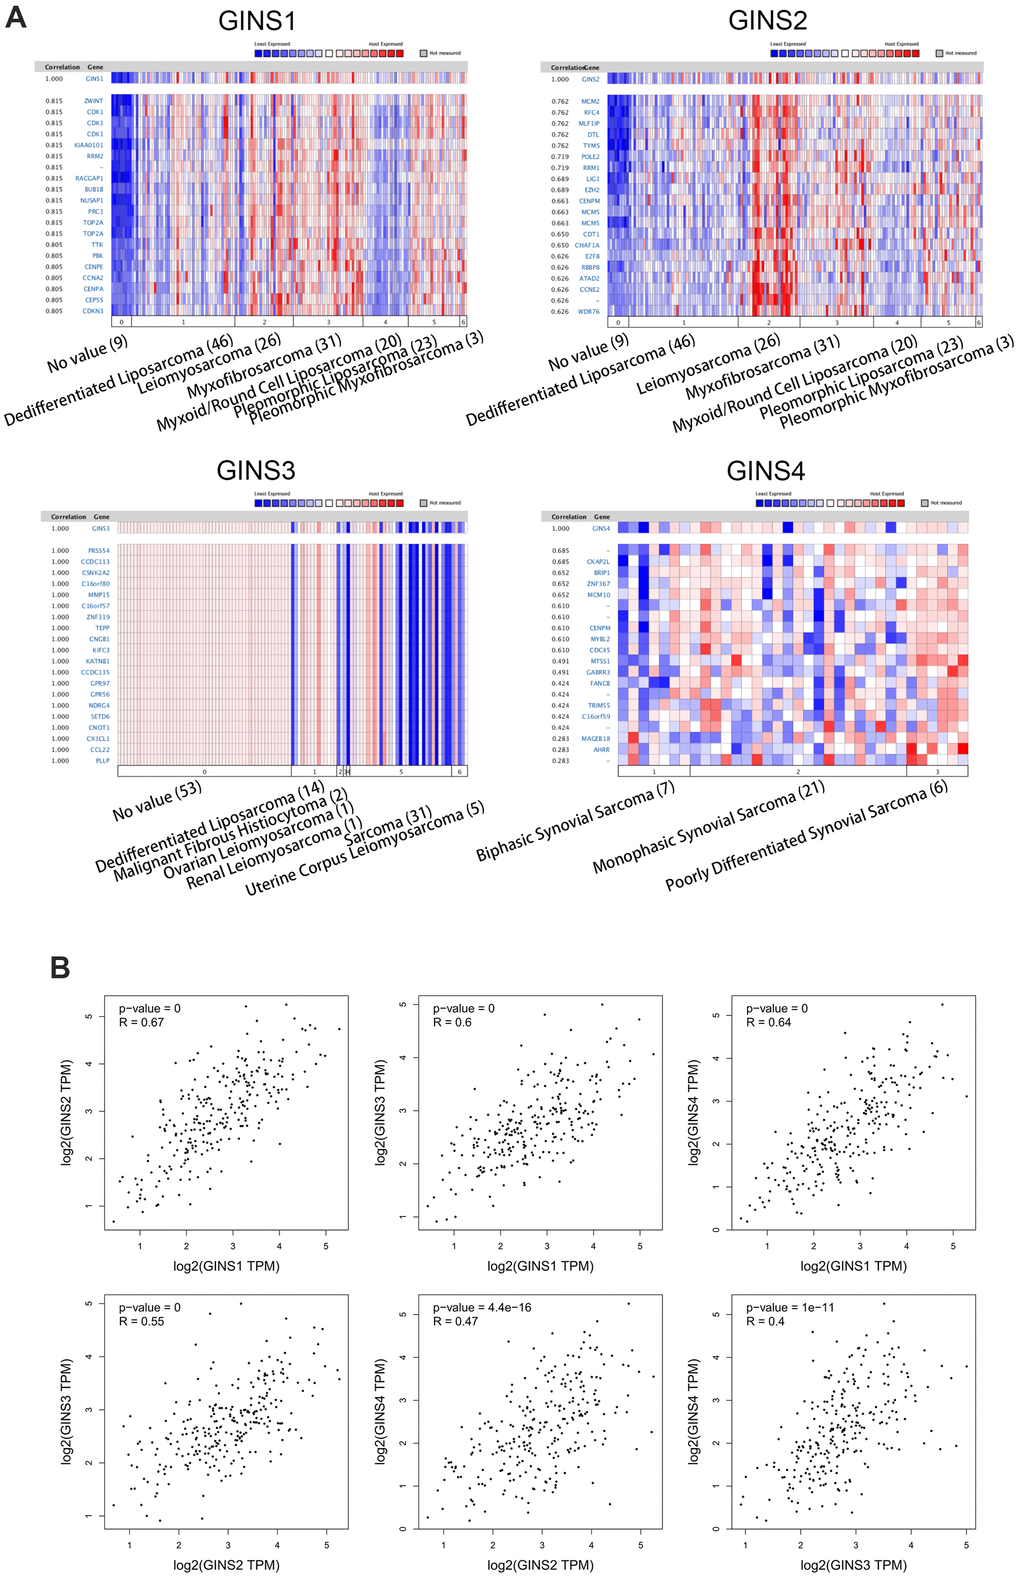 Genes co-expressed with the GINS gene family in human sarcoma tissues. (A) Co-expressed genes of the GINS gene family in sarcomas. (B) Correlation between members of the GINS gene family in tumors analyzed by GEPIA.